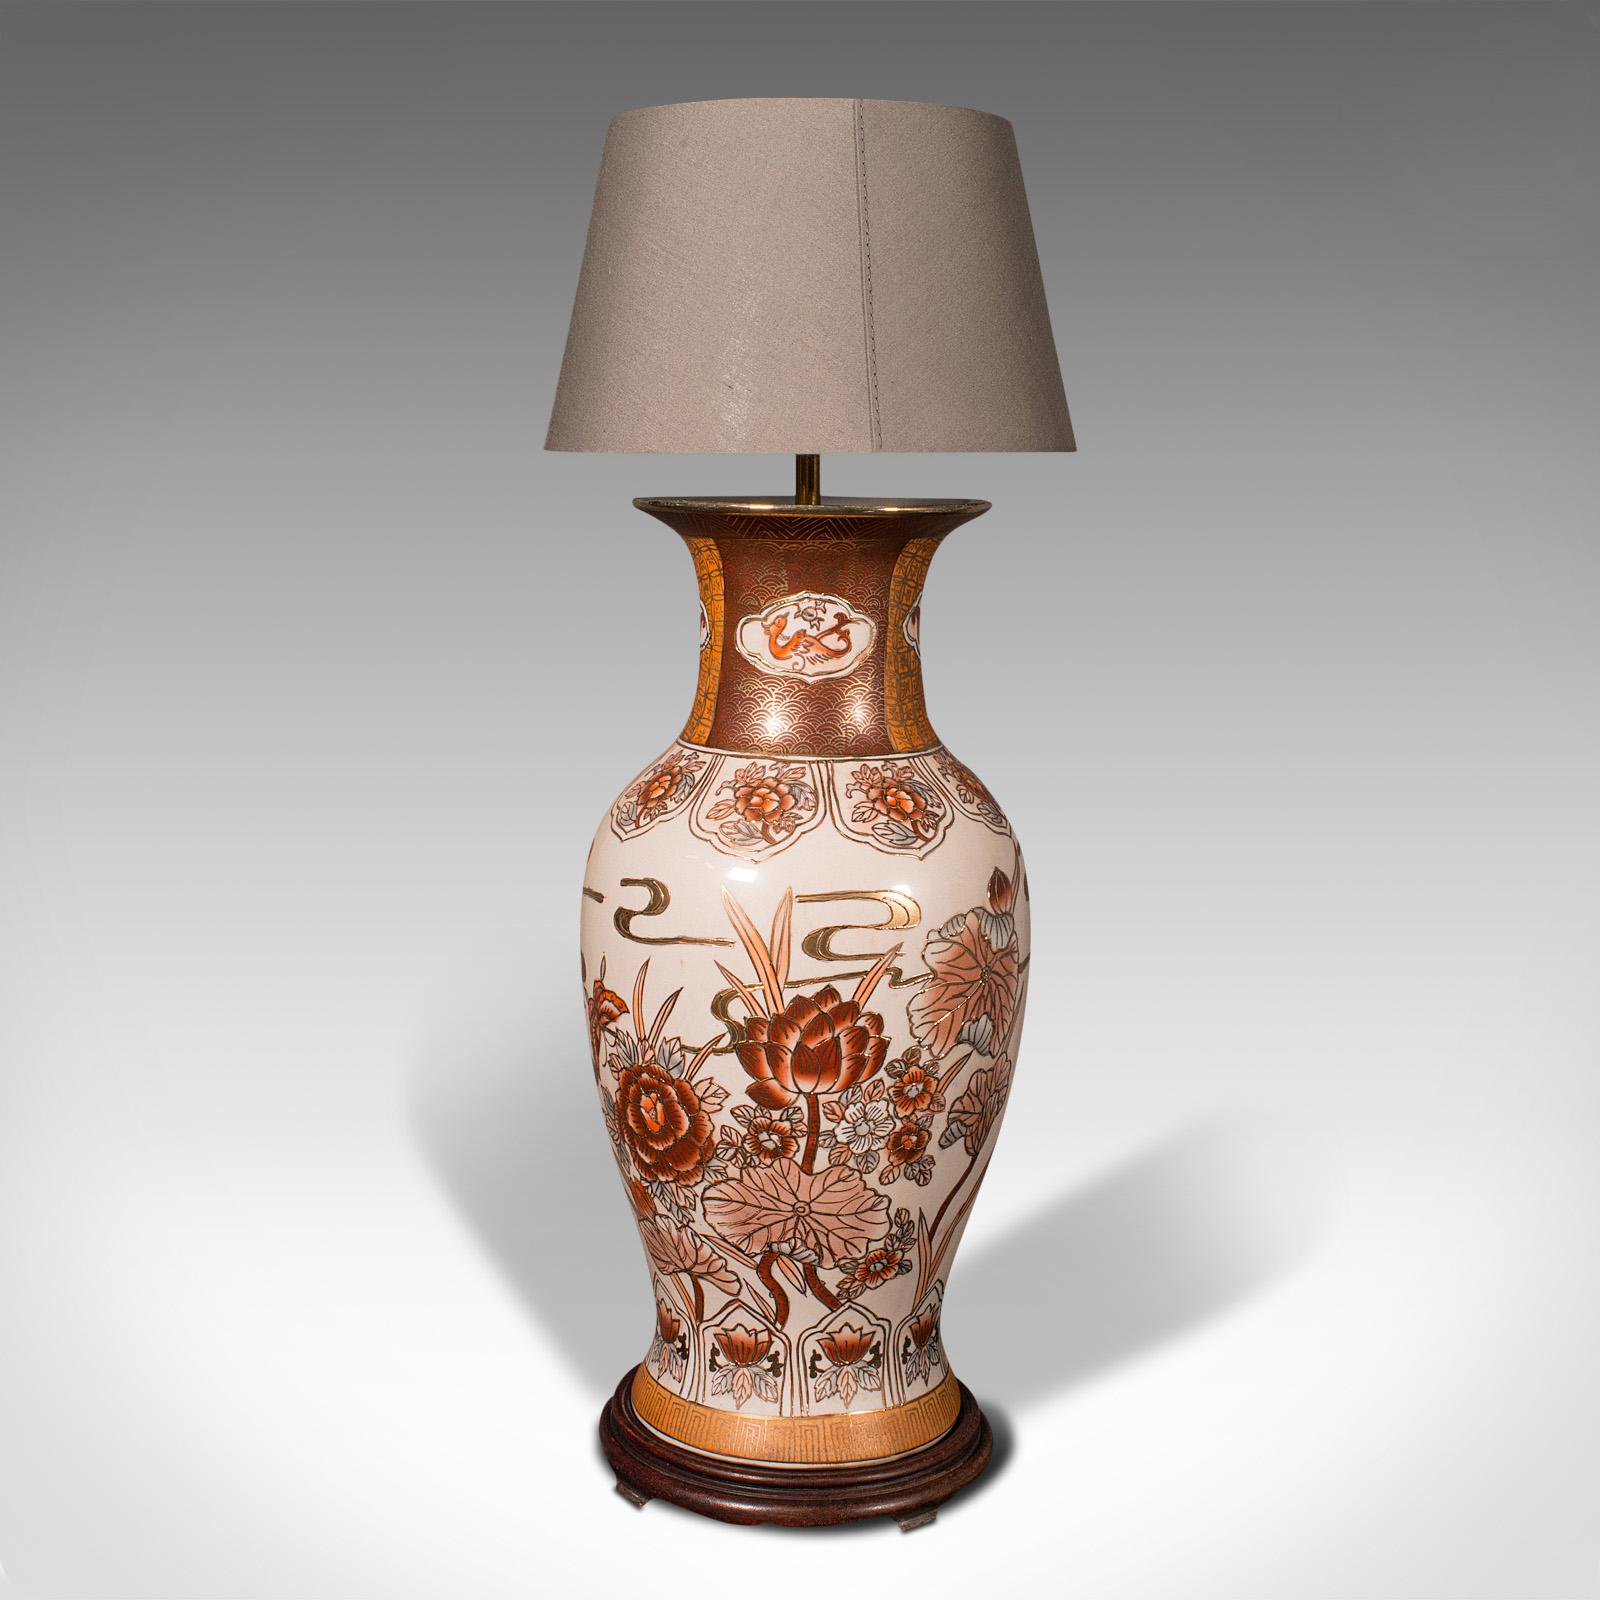 Pair of Vintage Table Lamps, Chinese, Ceramic, Decorative Light, Art Deco, 1940 For Sale 1